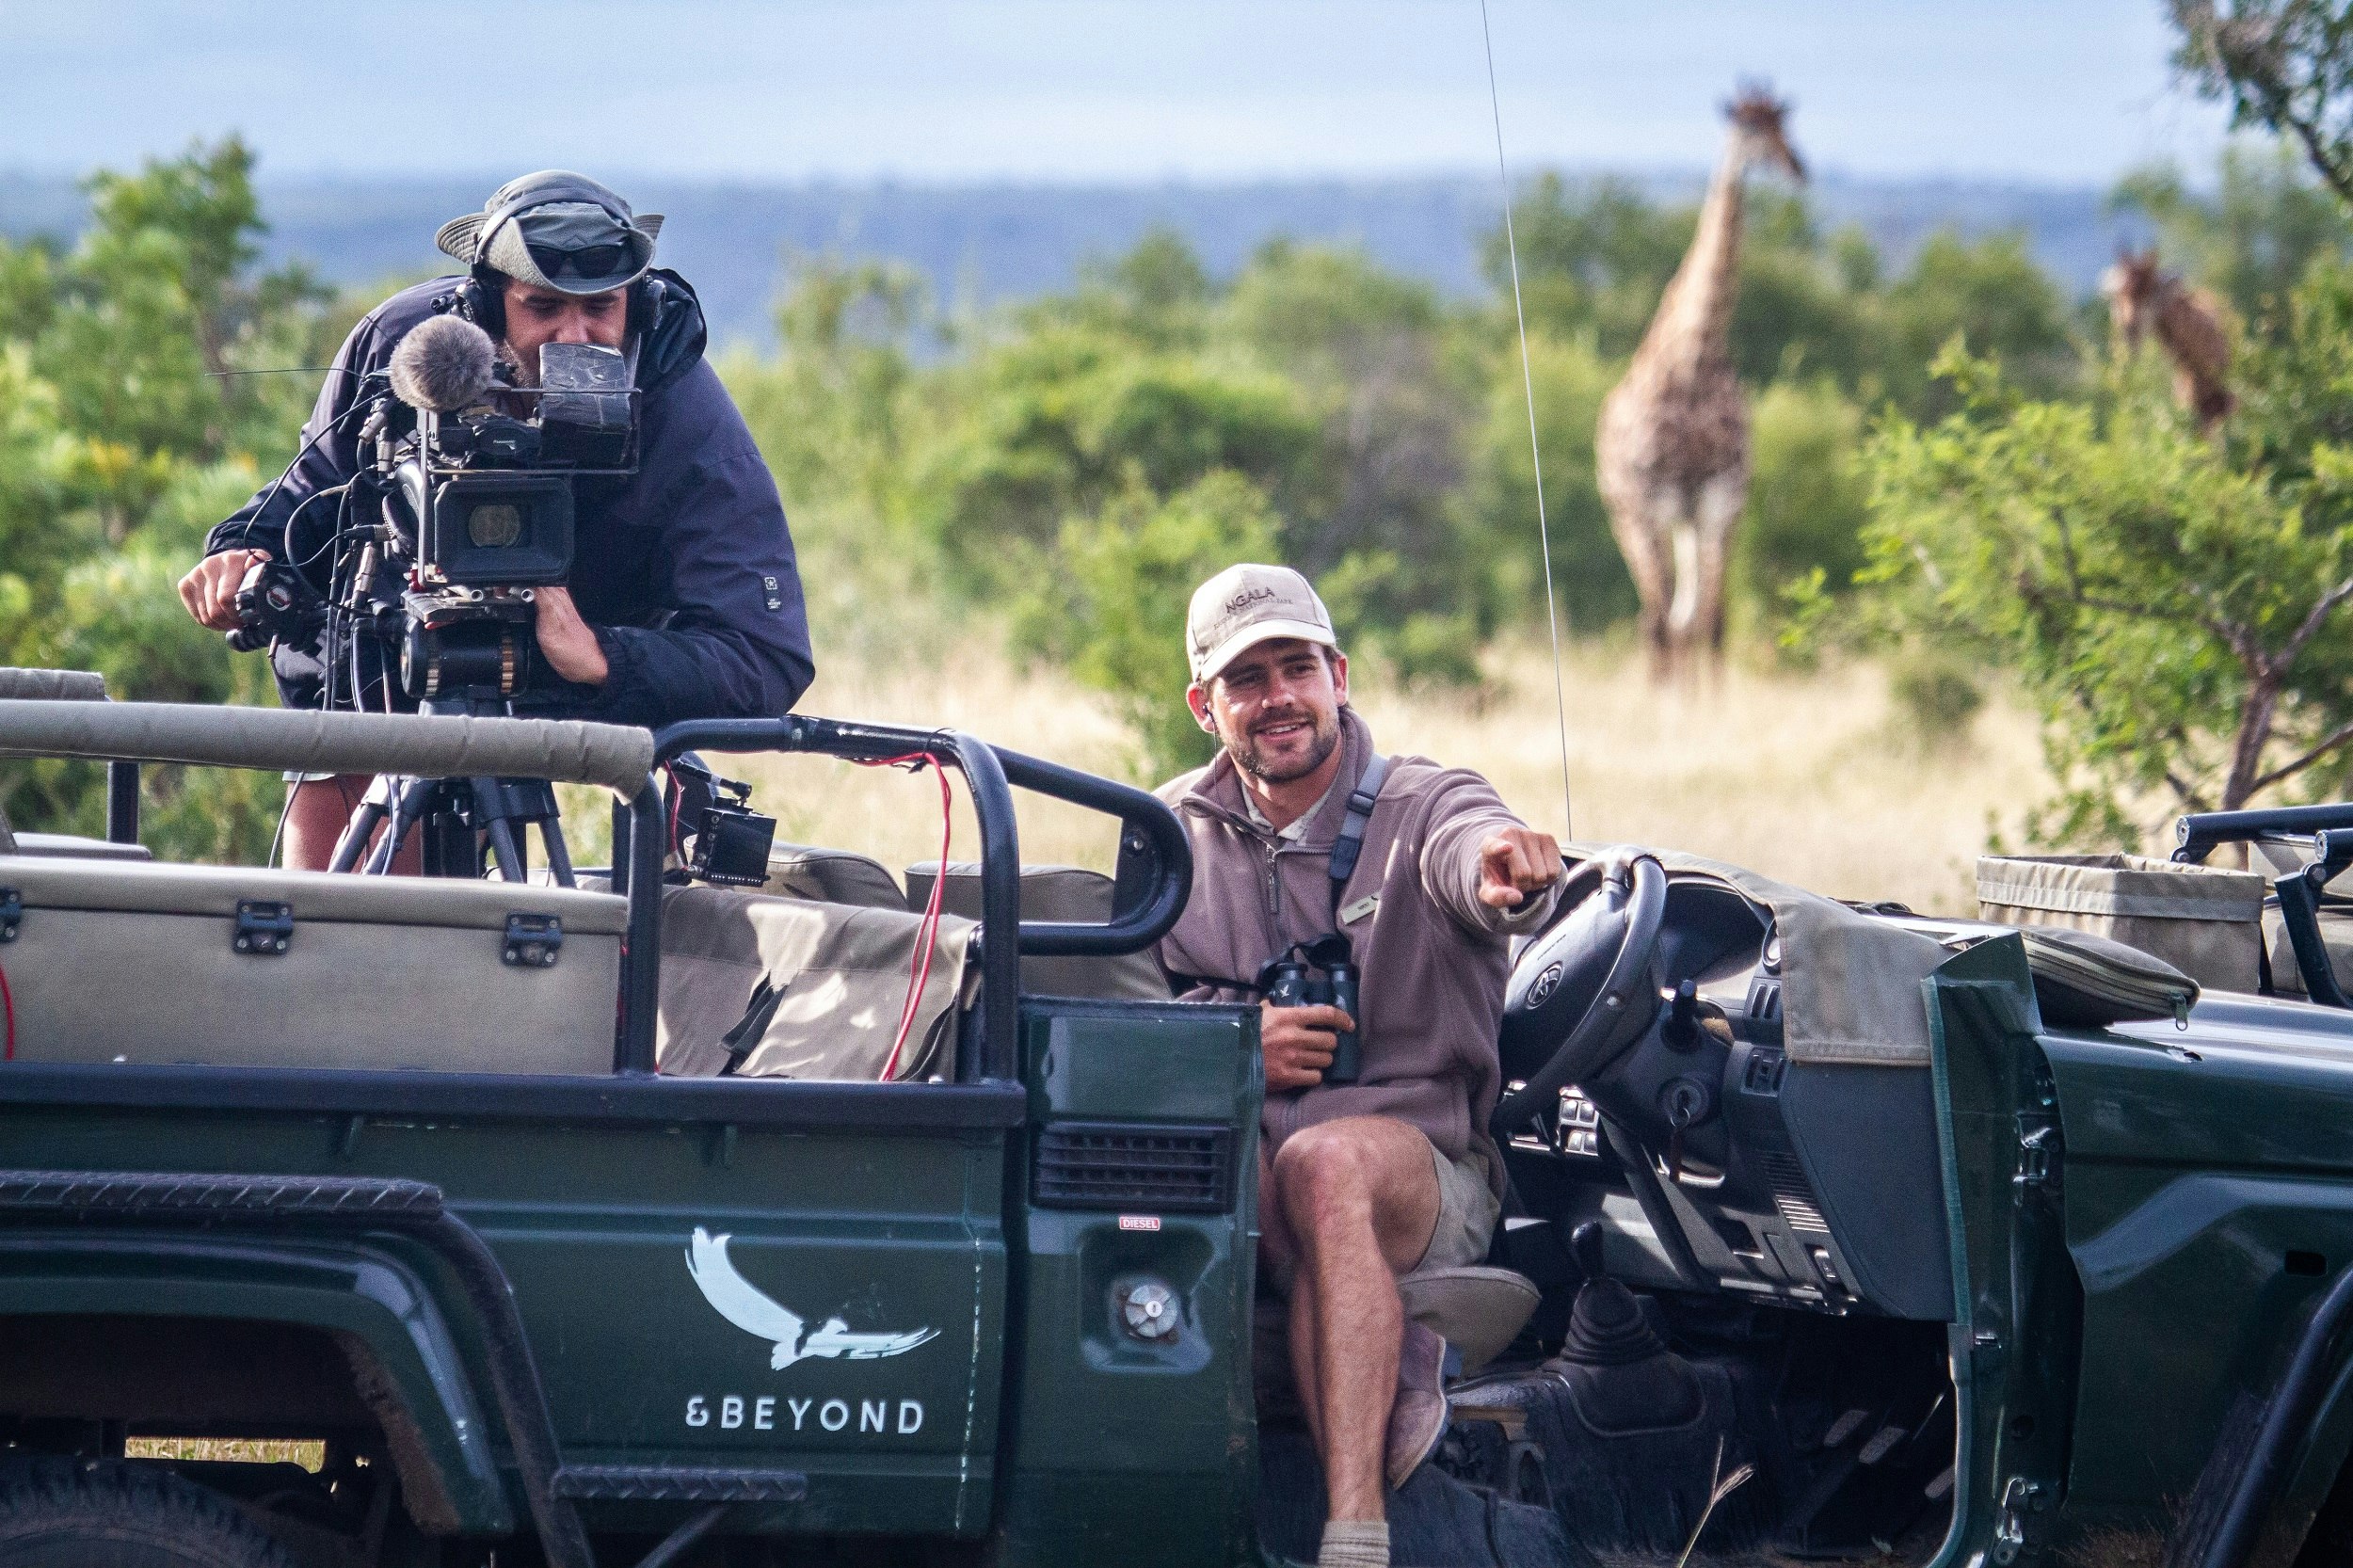 A safari guide sits in an open-topped 4WD and points to the foreground; in the back of the truck is a camera person pointing the lens in the same direction. In the background is a blurred giraffe.